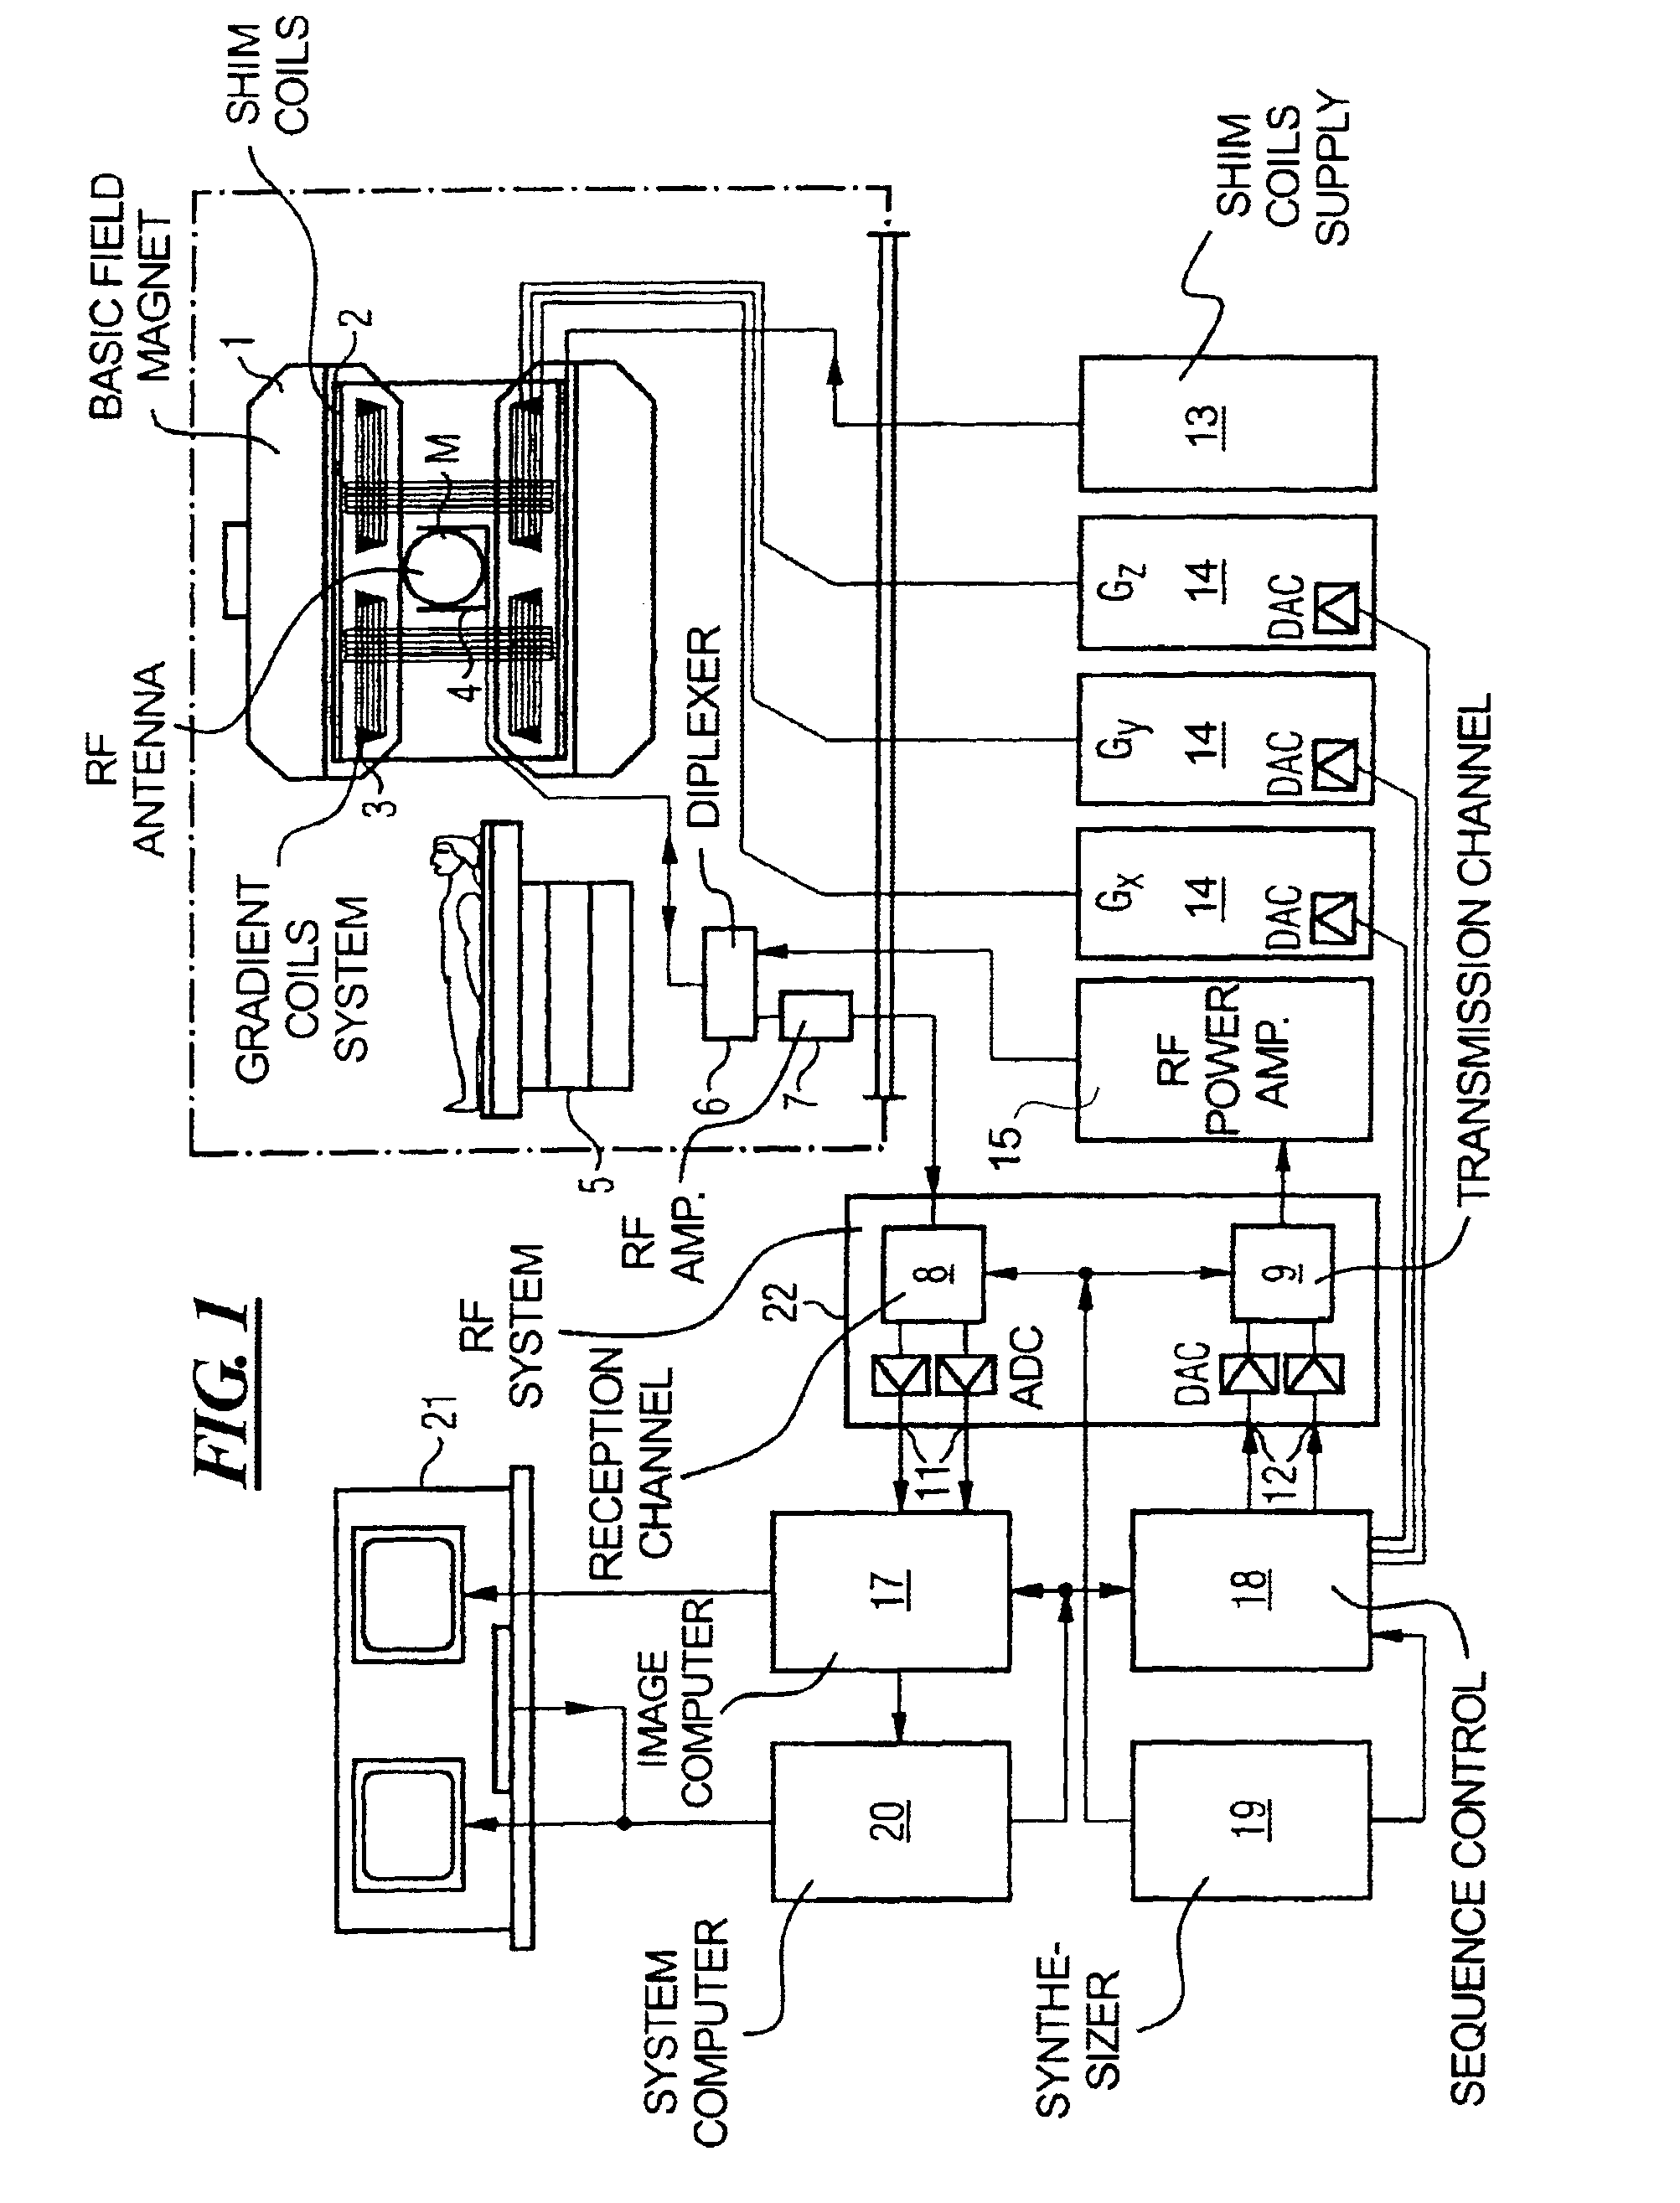 Magnetic resonance imaging method and apparatus with spatial coding using readout segmentation